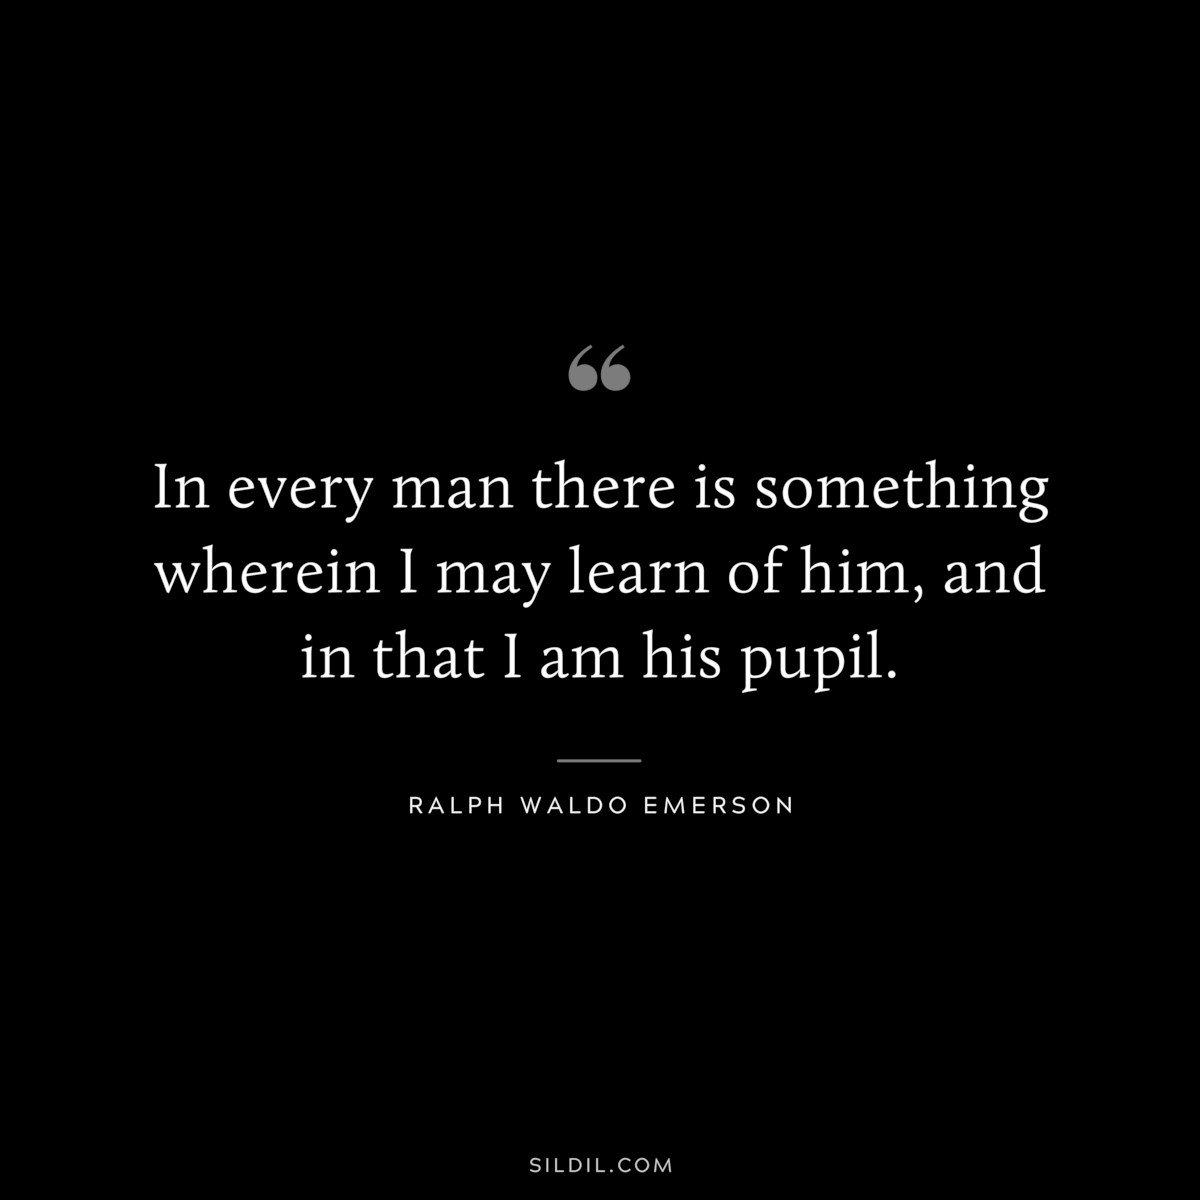 In every man there is something wherein I may learn of him, and in that I am his pupil. — Ralph Waldo Emerson